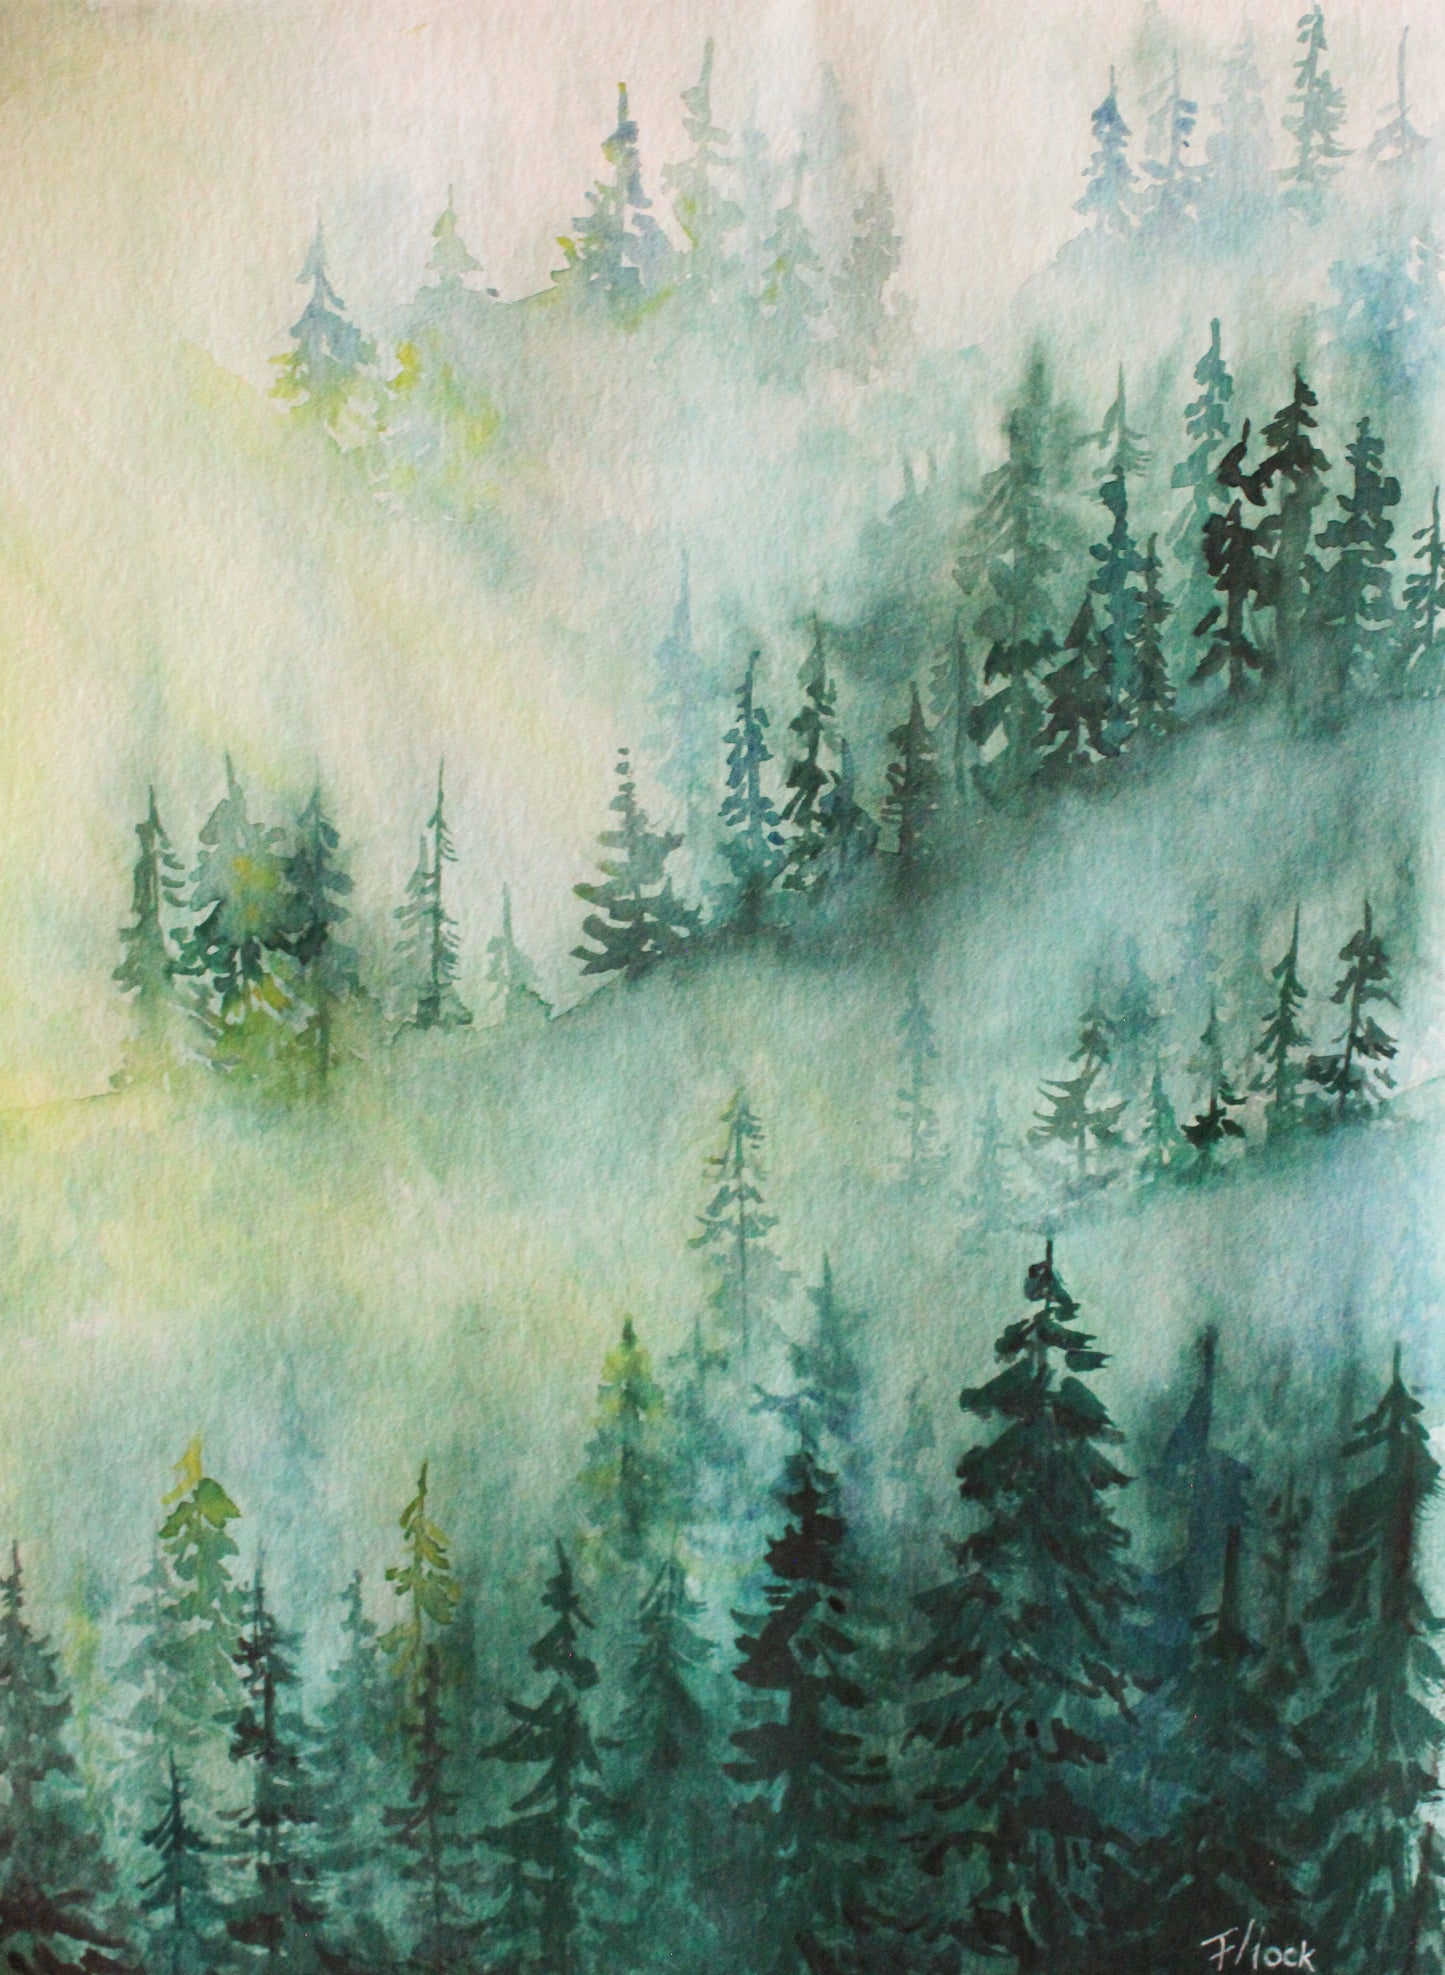 Misty forest - original watercolor painting